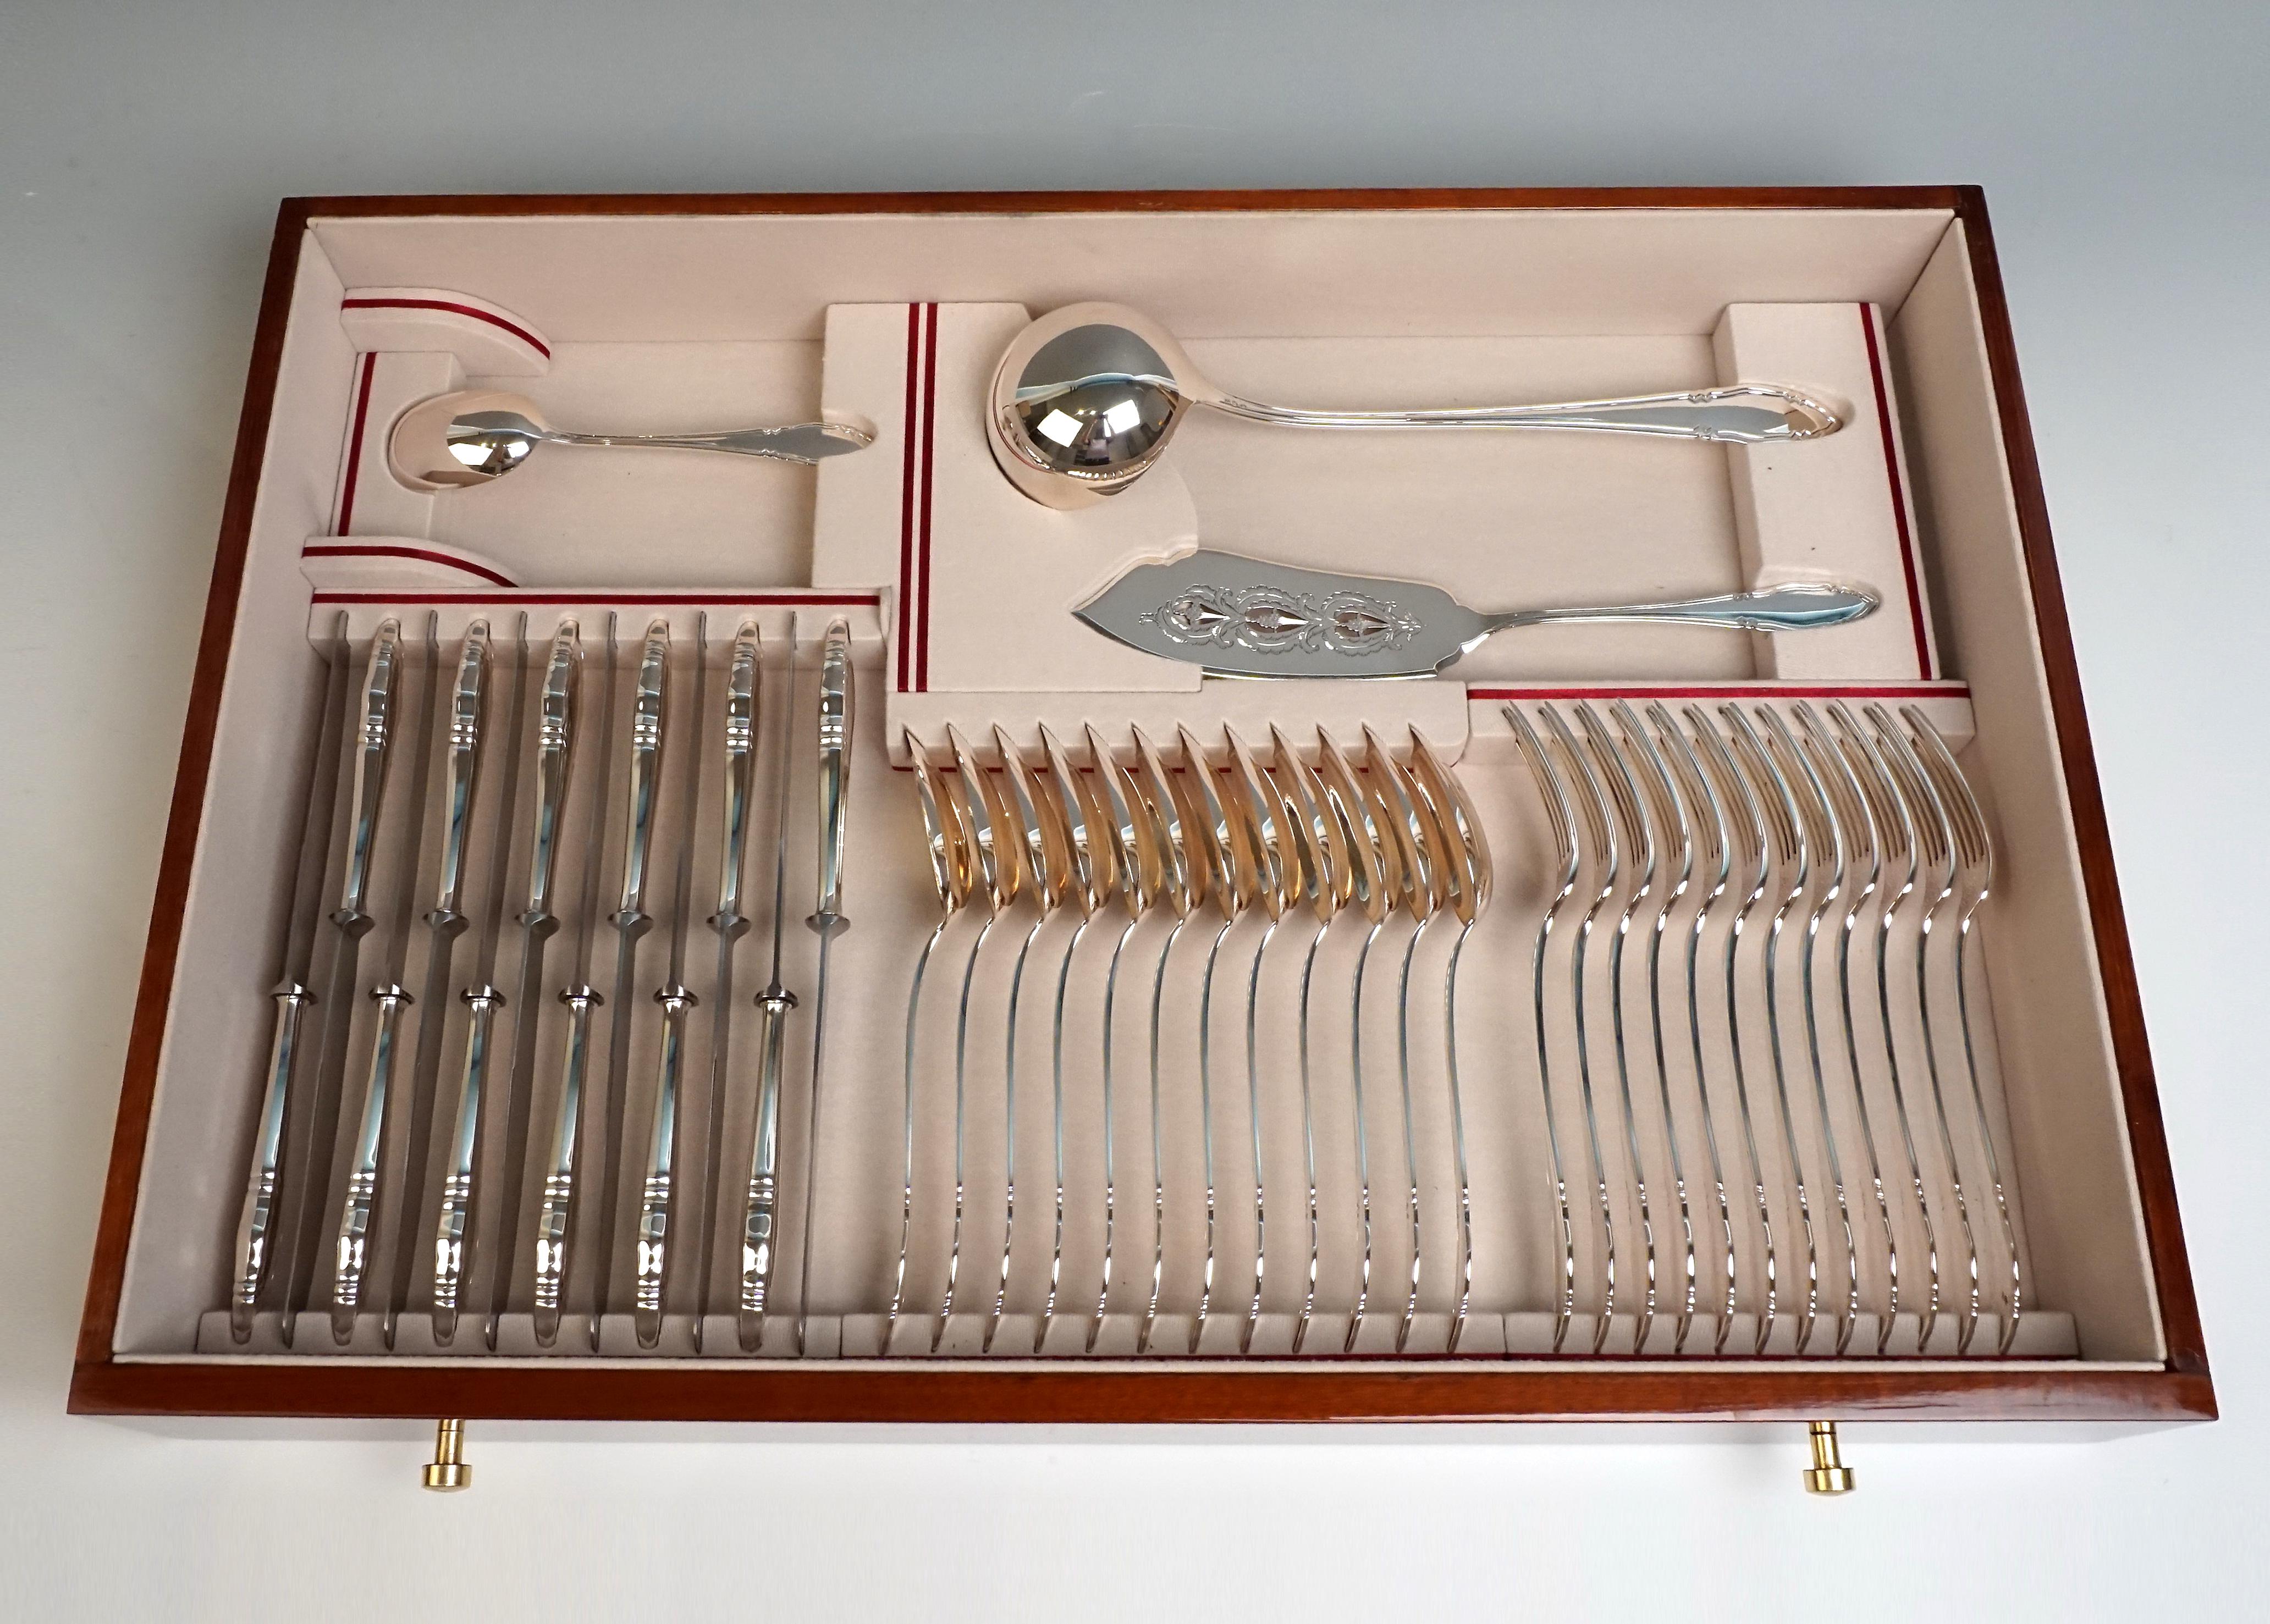 Hand-Crafted Viennese Silver Art Nouveau 121 Parts Cutlery Set for 12 People by Klinkosch  For Sale